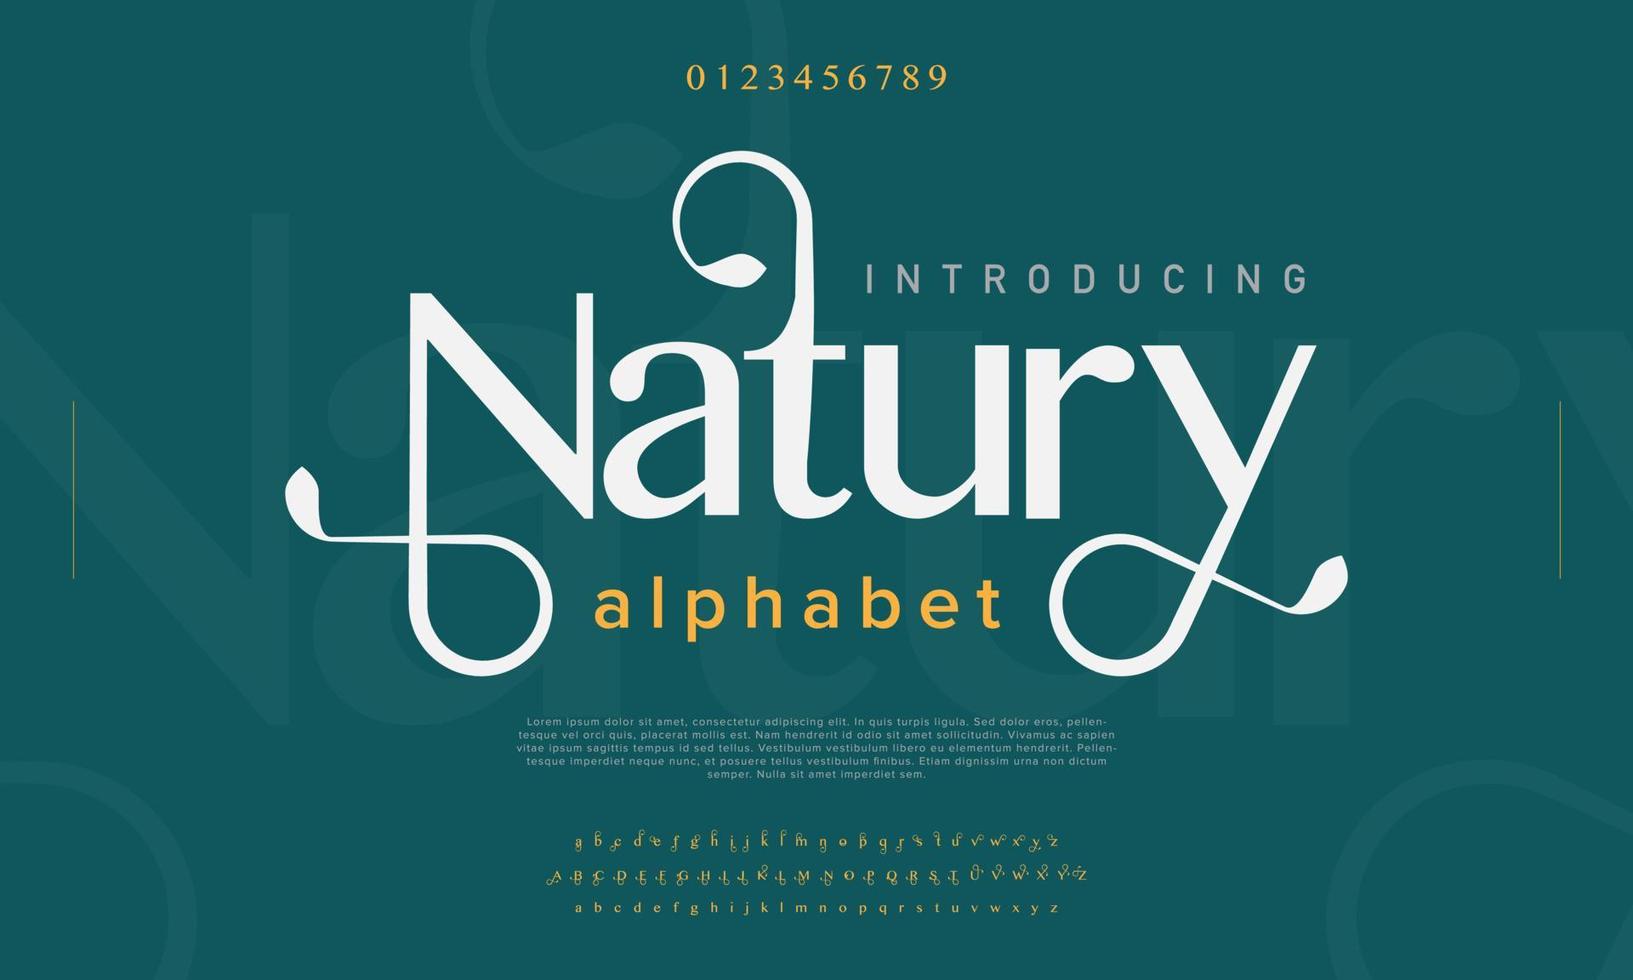 Natury abstract Fashion font alphabet. Minimal modern urban fonts for logo, brand etc. Typography typeface uppercase lowercase and number. vector illustration